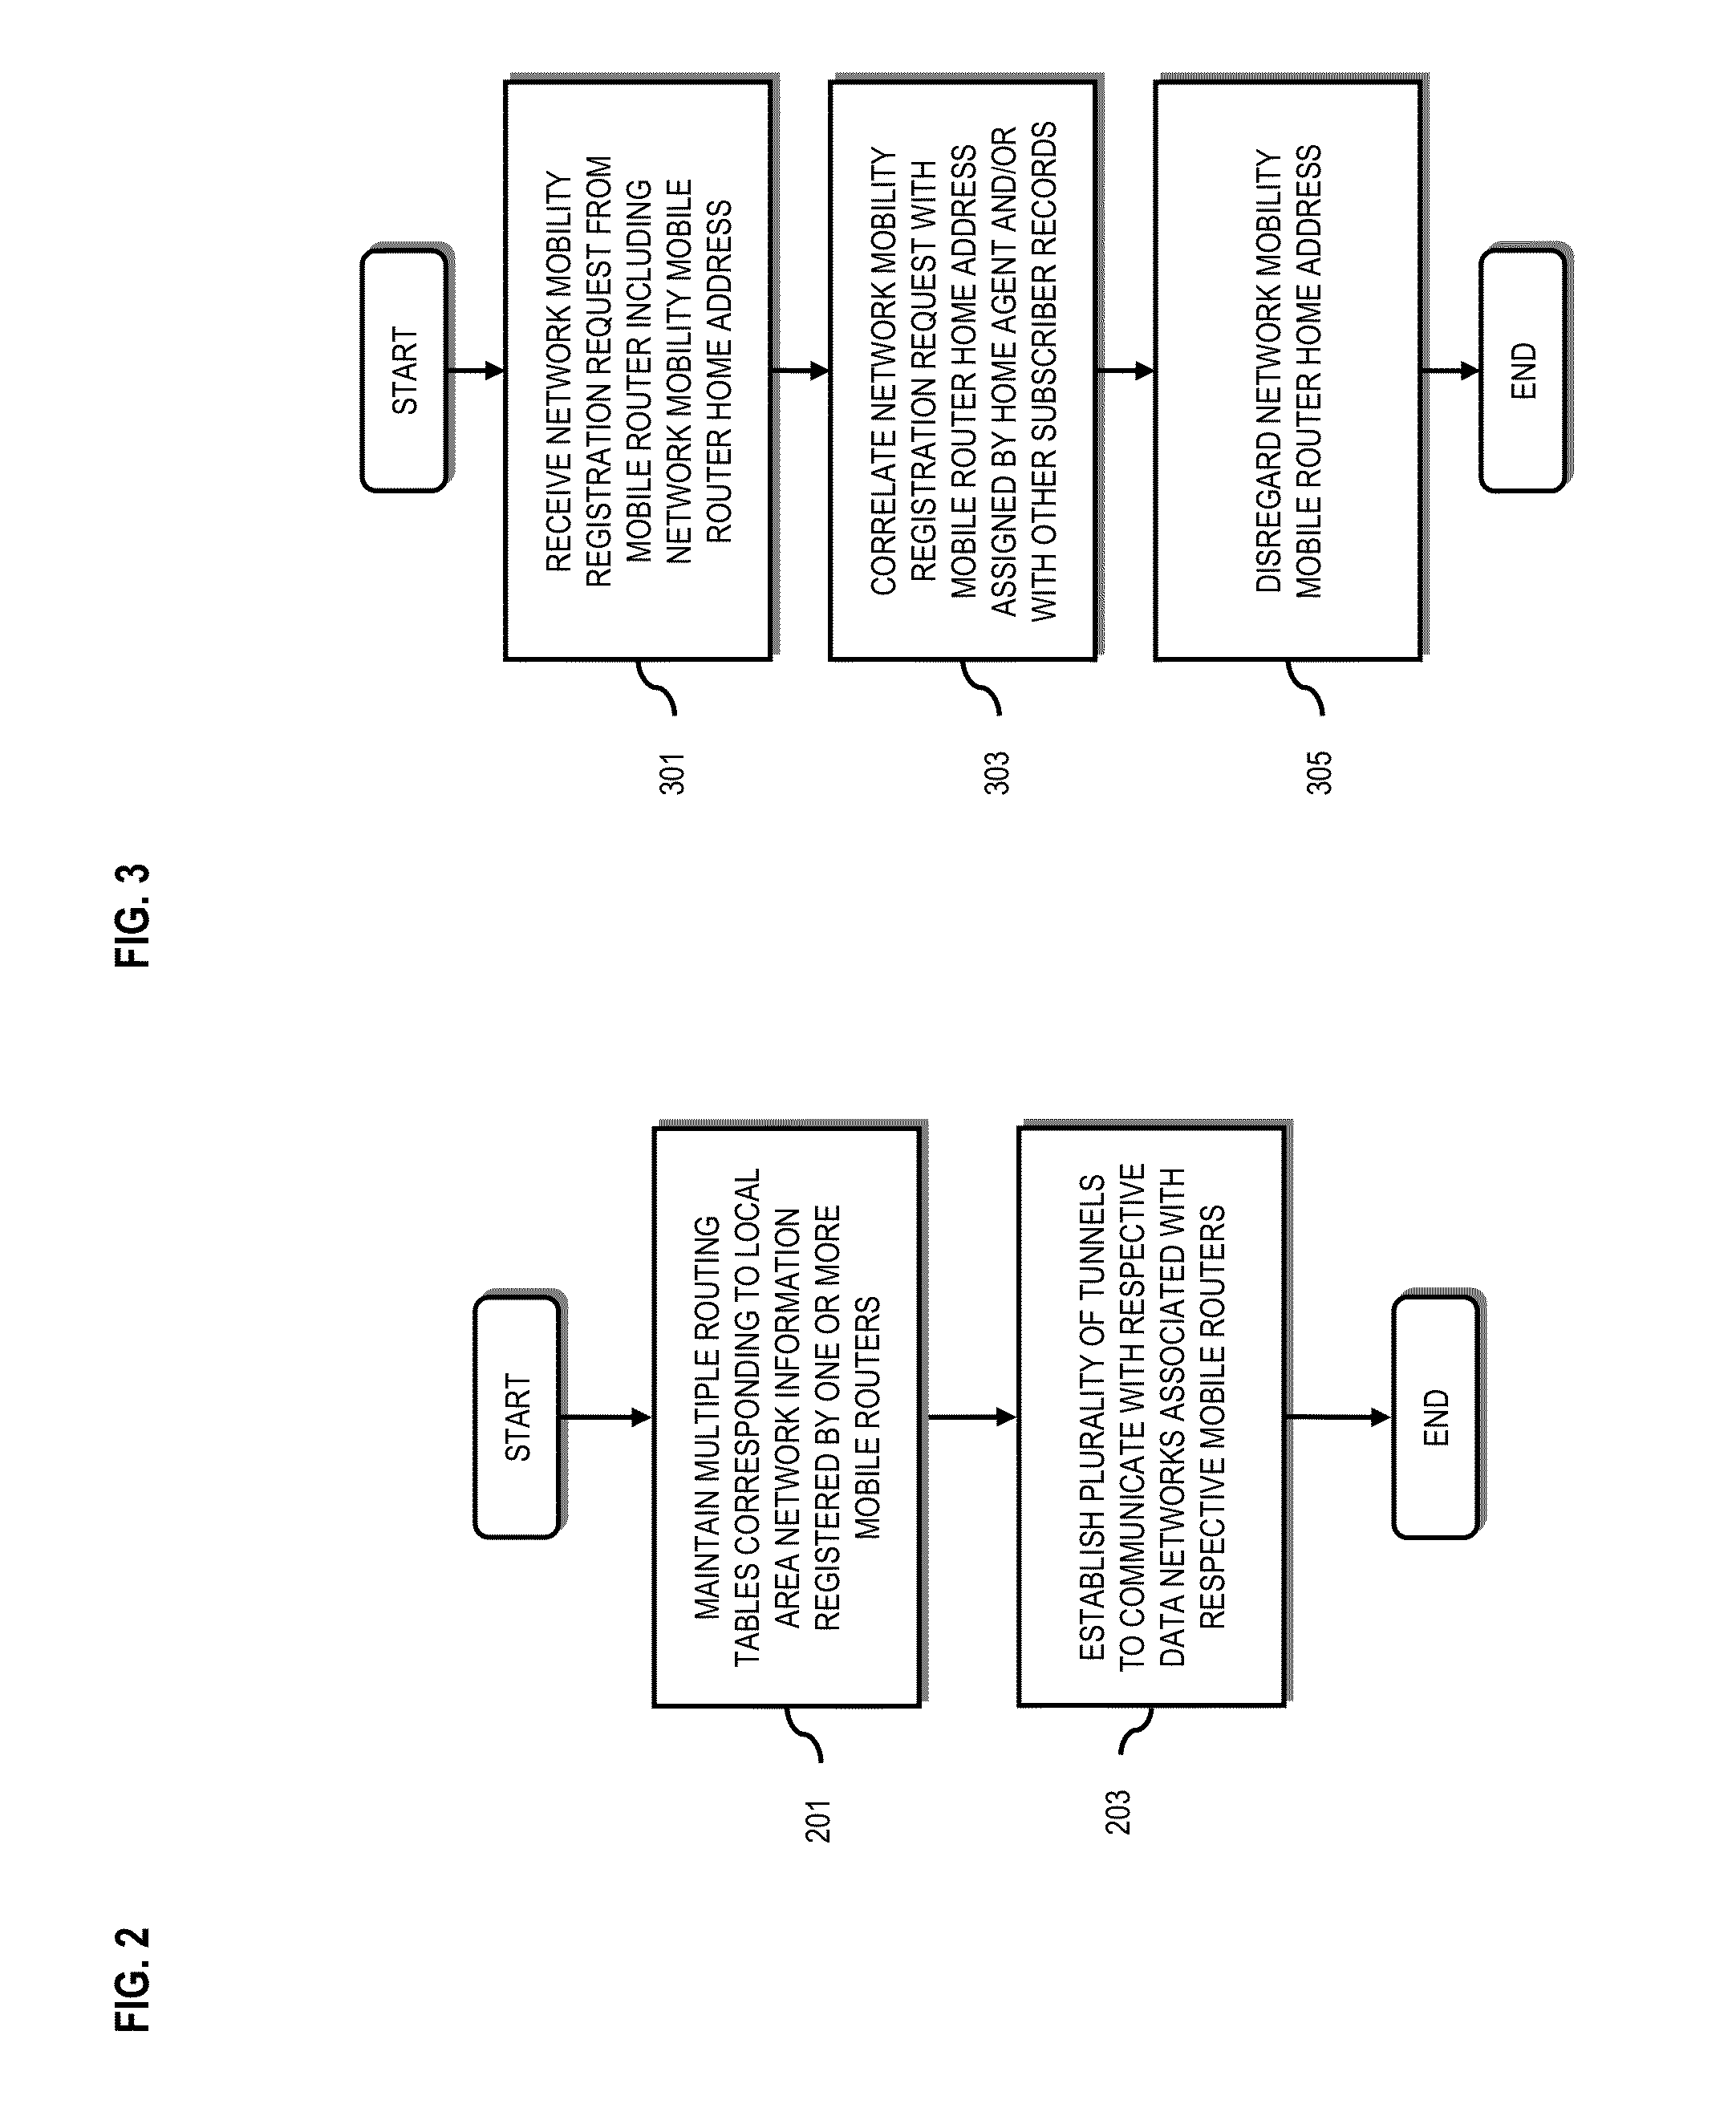 System and method for providing network mobility